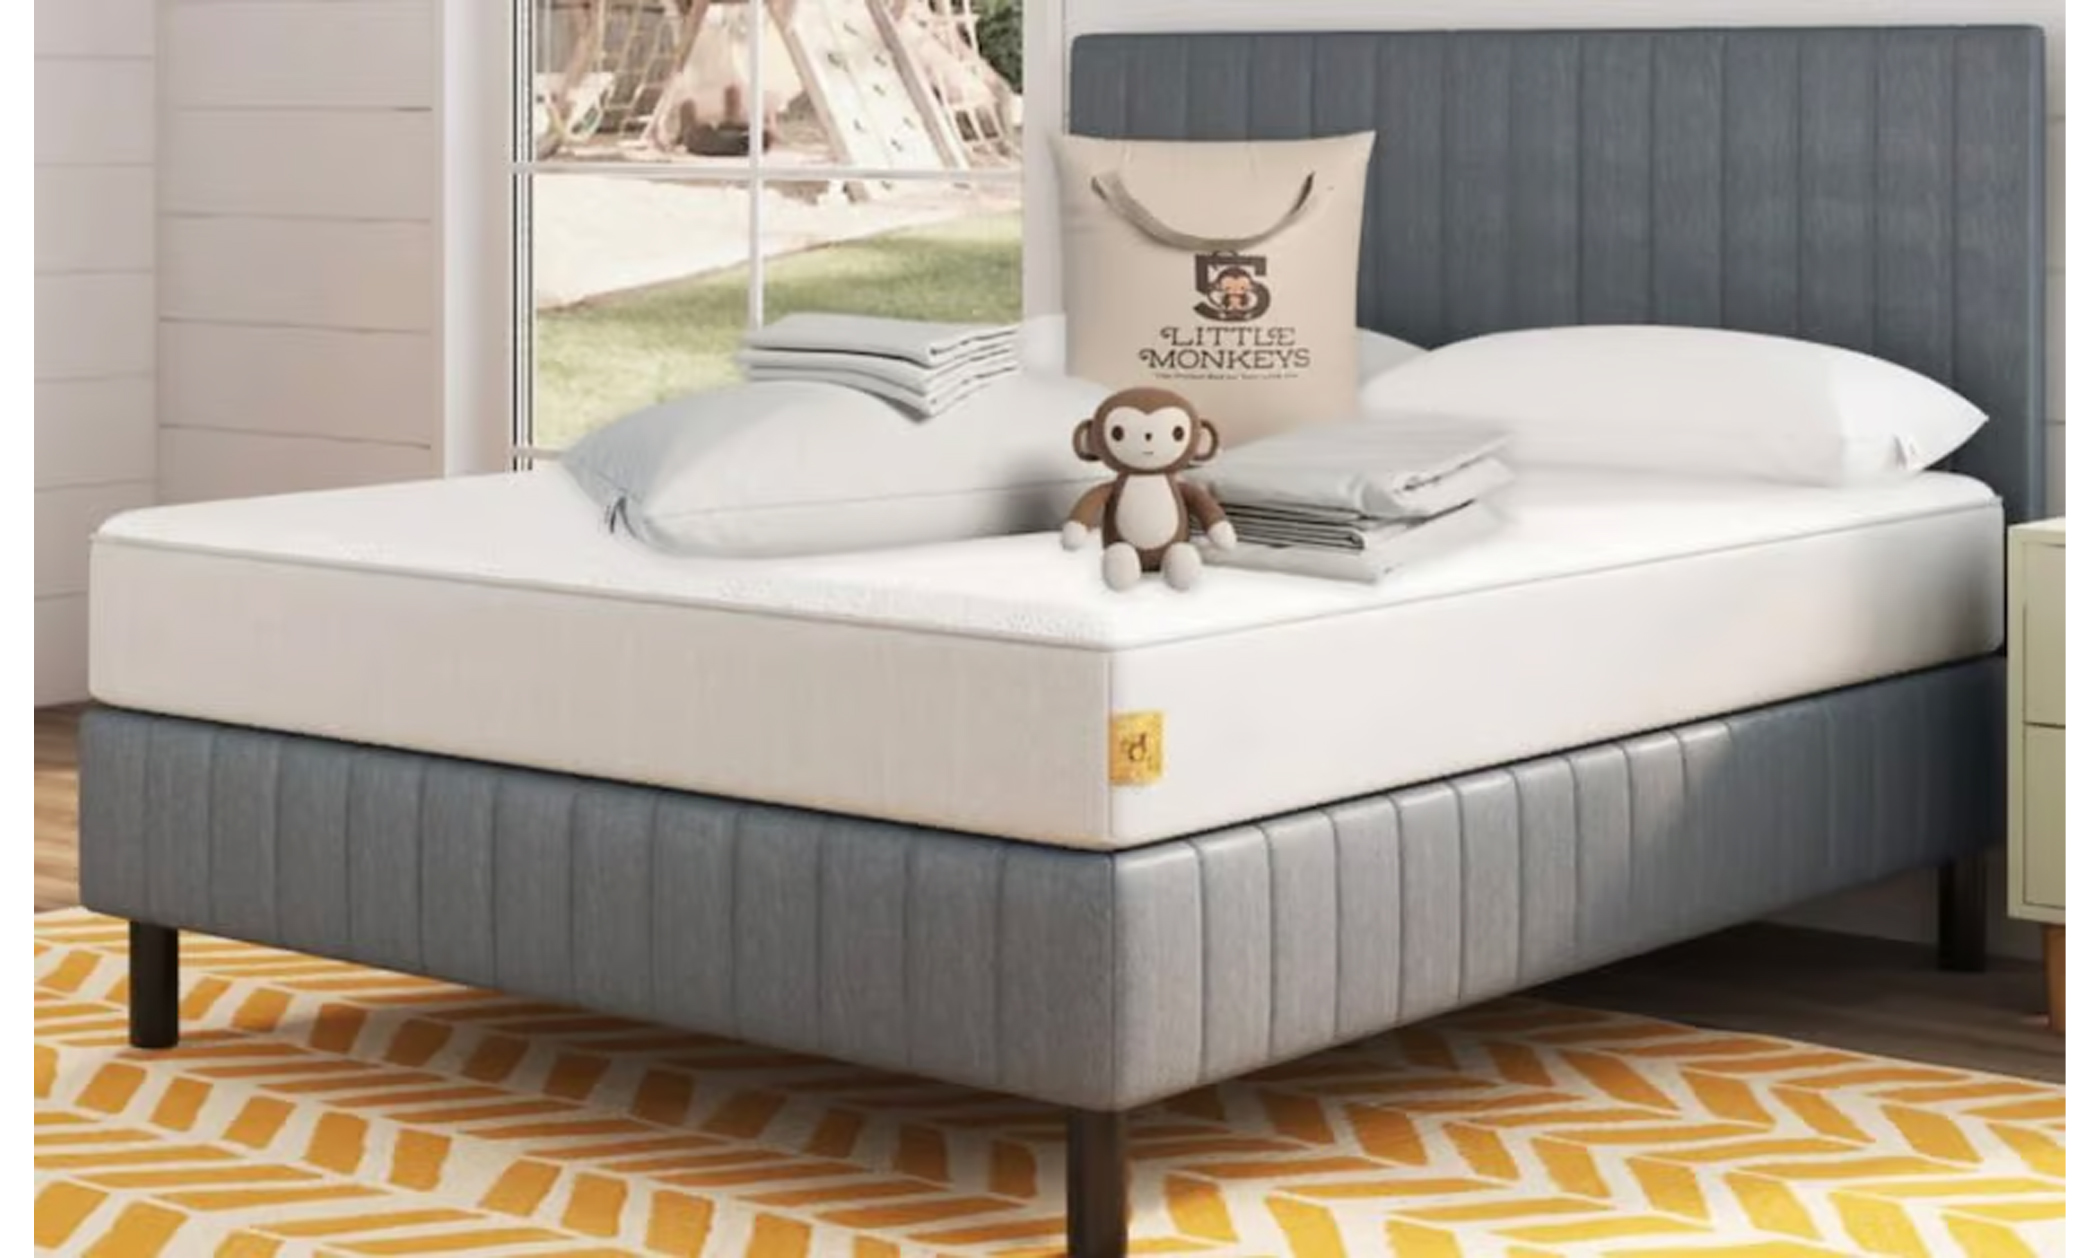 Enter for a Chance to Win a Five Little Monkeys Mattress and Bedding!